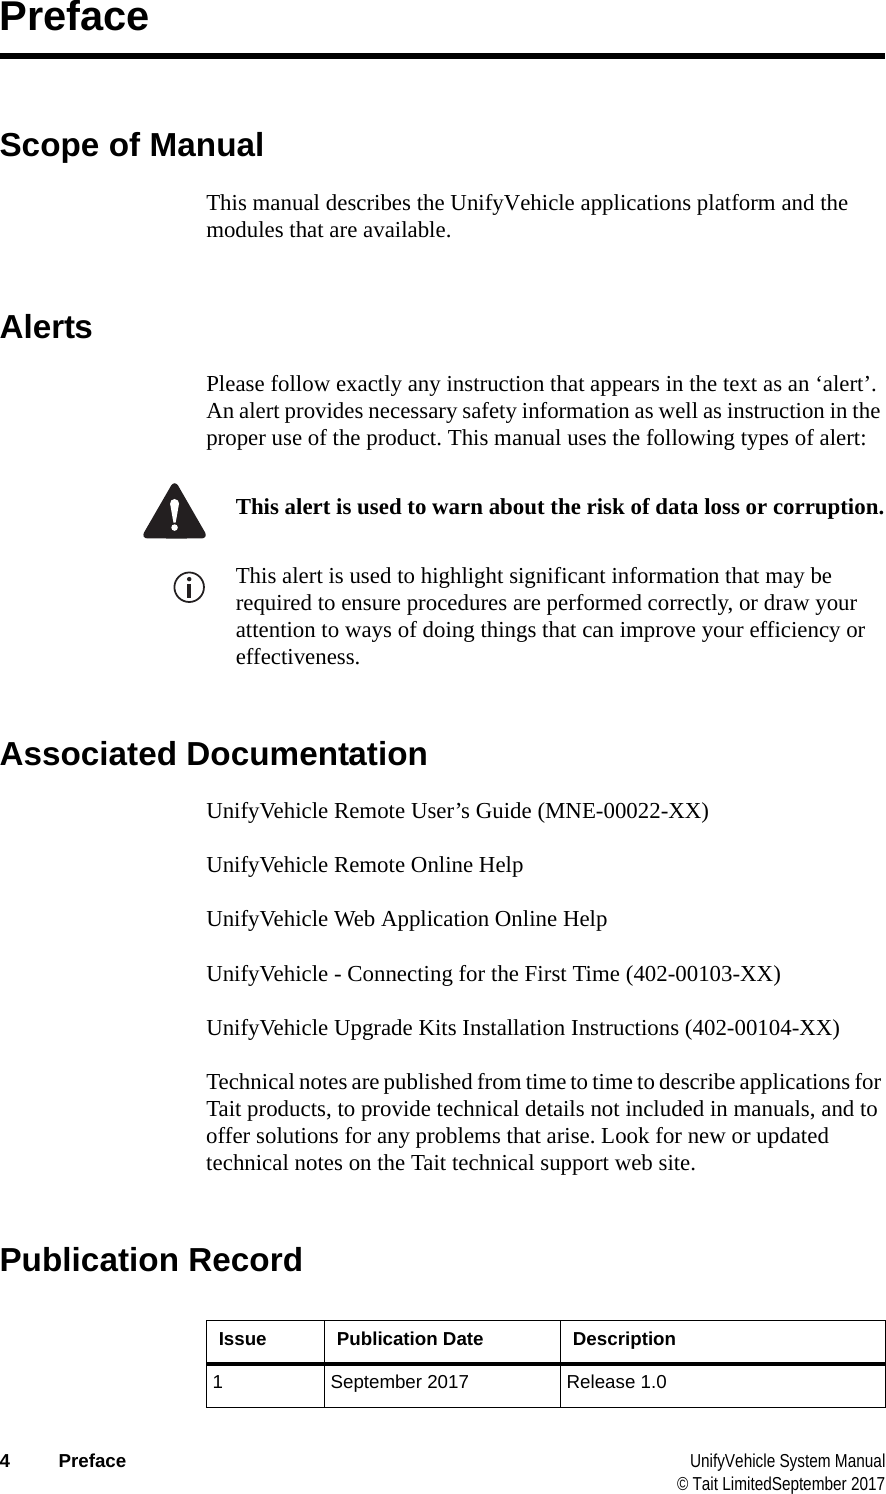  4 Preface UnifyVehicle System Manual© Tait LimitedSeptember 2017PrefaceScope of ManualThis manual describes the UnifyVehicle applications platform and the modules that are available.AlertsPlease follow exactly any instruction that appears in the text as an ‘alert’. An alert provides necessary safety information as well as instruction in the proper use of the product. This manual uses the following types of alert:This alert is used to warn about the risk of data loss or corruption.This alert is used to highlight significant information that may be required to ensure procedures are performed correctly, or draw your attention to ways of doing things that can improve your efficiency or effectiveness.Associated DocumentationUnifyVehicle Remote User’s Guide (MNE-00022-XX)UnifyVehicle Remote Online HelpUnifyVehicle Web Application Online HelpUnifyVehicle - Connecting for the First Time (402-00103-XX)UnifyVehicle Upgrade Kits Installation Instructions (402-00104-XX)Technical notes are published from time to time to describe applications for Tait products, to provide technical details not included in manuals, and to offer solutions for any problems that arise. Look for new or updated technical notes on the Tait technical support web site.Publication RecordIssue Publication Date Description1 September 2017 Release 1.0